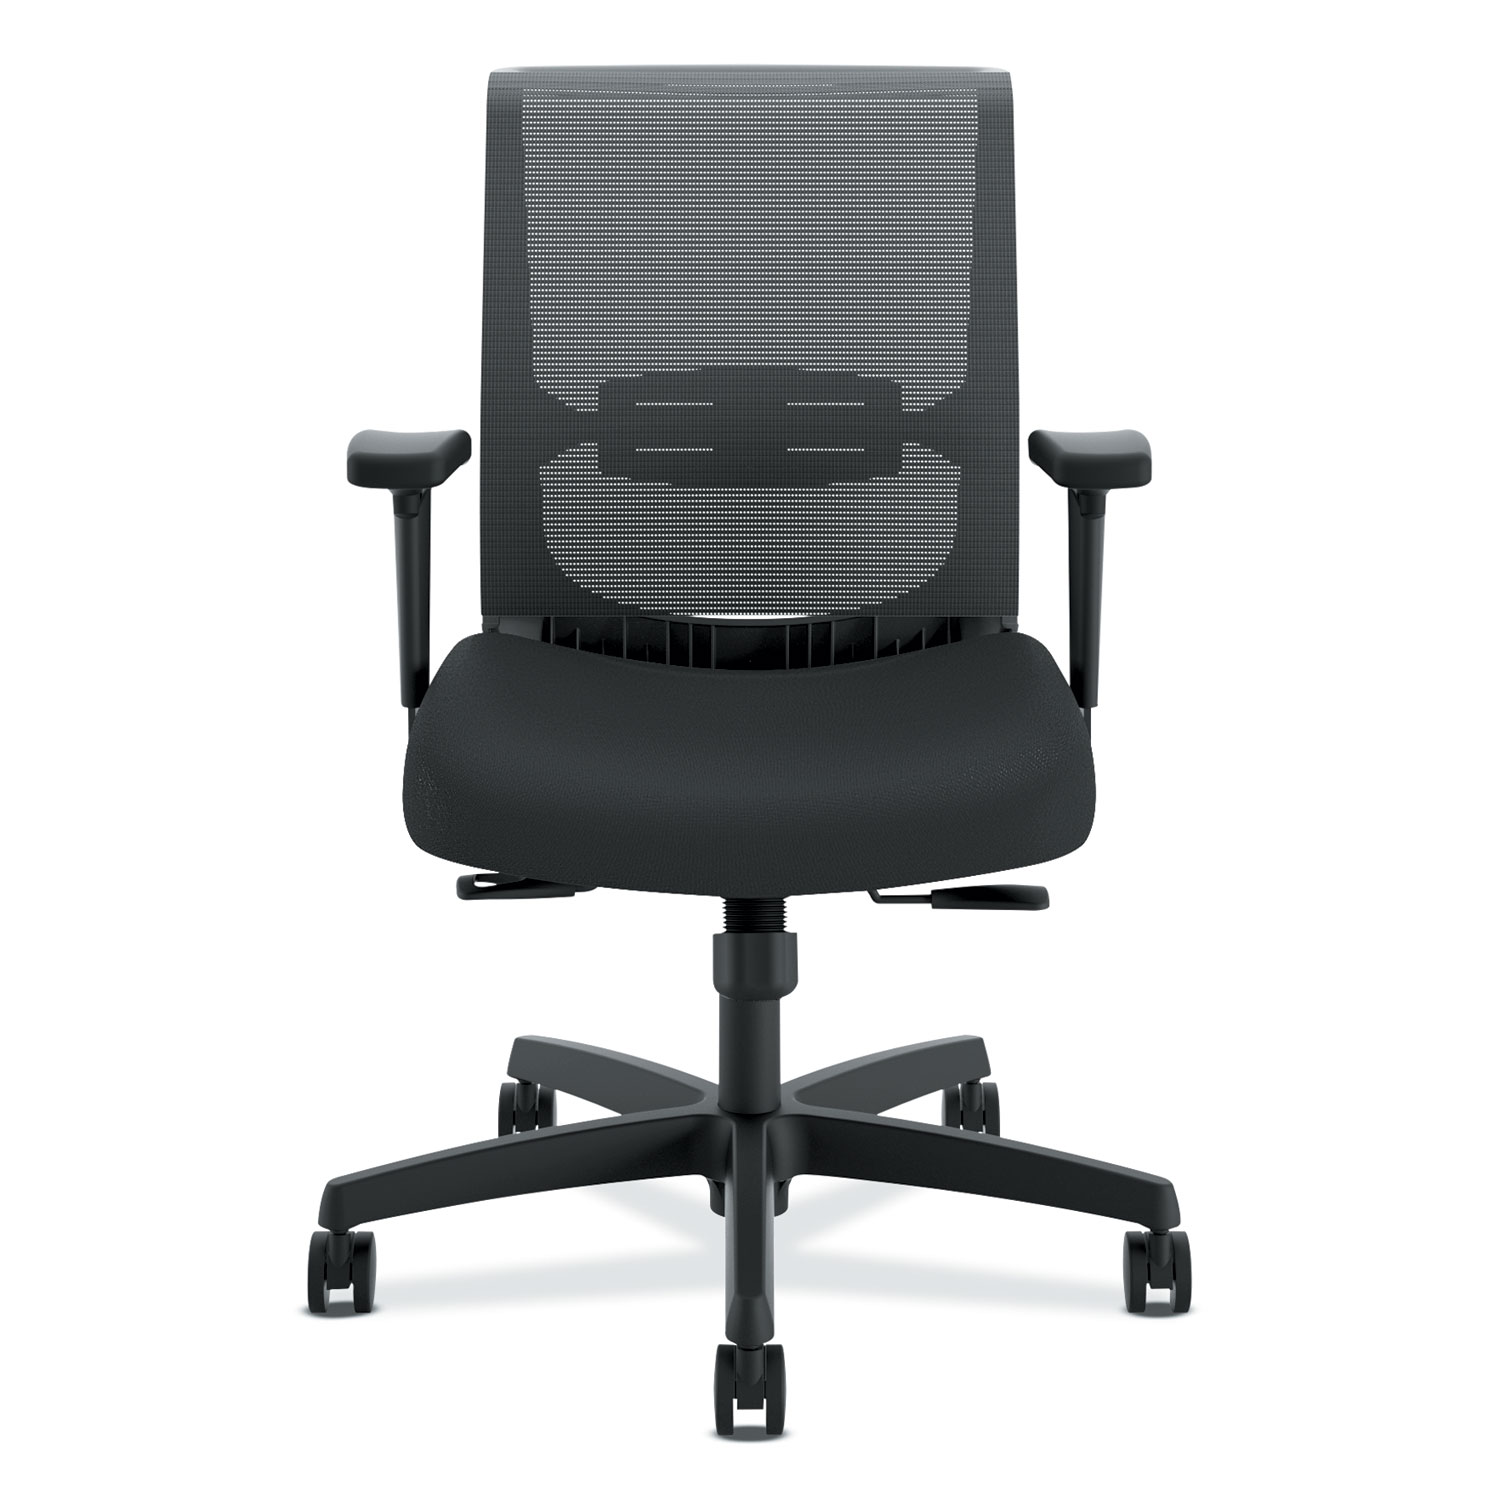  HON HONCMY1AACCF10 Convergence Mid-Back Task Chair with Syncho-Tilt Control/Seat Slide, Supports up to 275 lbs, Black Seat/Back, Black Base (HONCMY1AACCF10) 